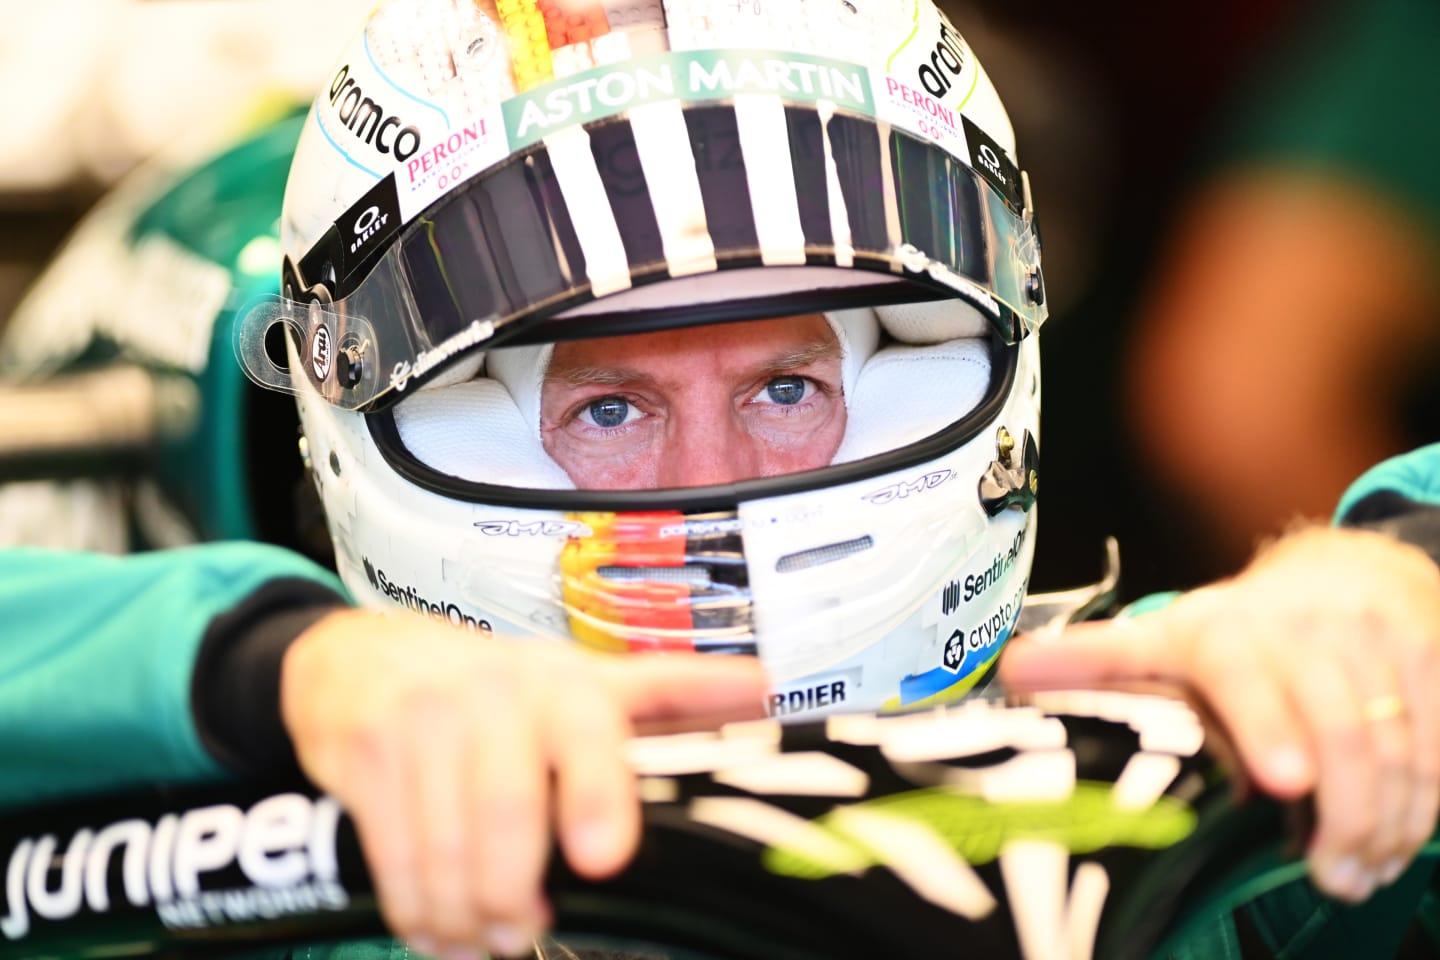 BUDAPEST, HUNGARY - JULY 29: Sebastian Vettel of Germany and Aston Martin F1 Team prepares to drive in the garage during practice ahead of the F1 Grand Prix of Hungary at Hungaroring on July 29, 2022 in Budapest, Hungary. (Photo by Dan Mullan/Getty Images)